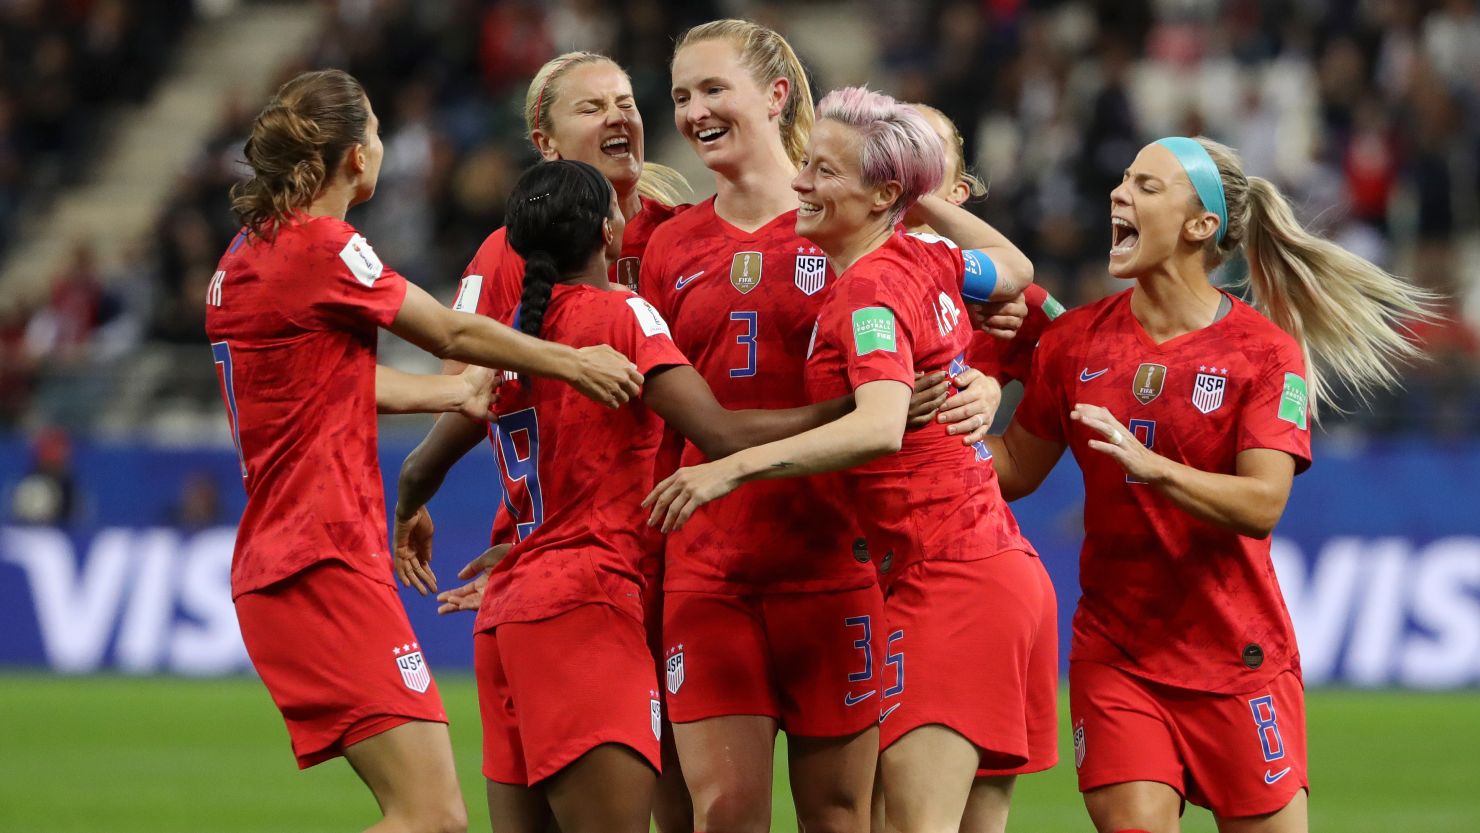 Samantha Mewis of the USA celebrates with teammates after scoring her team's fourth goal during the match against Thailand on Tuesday in France.